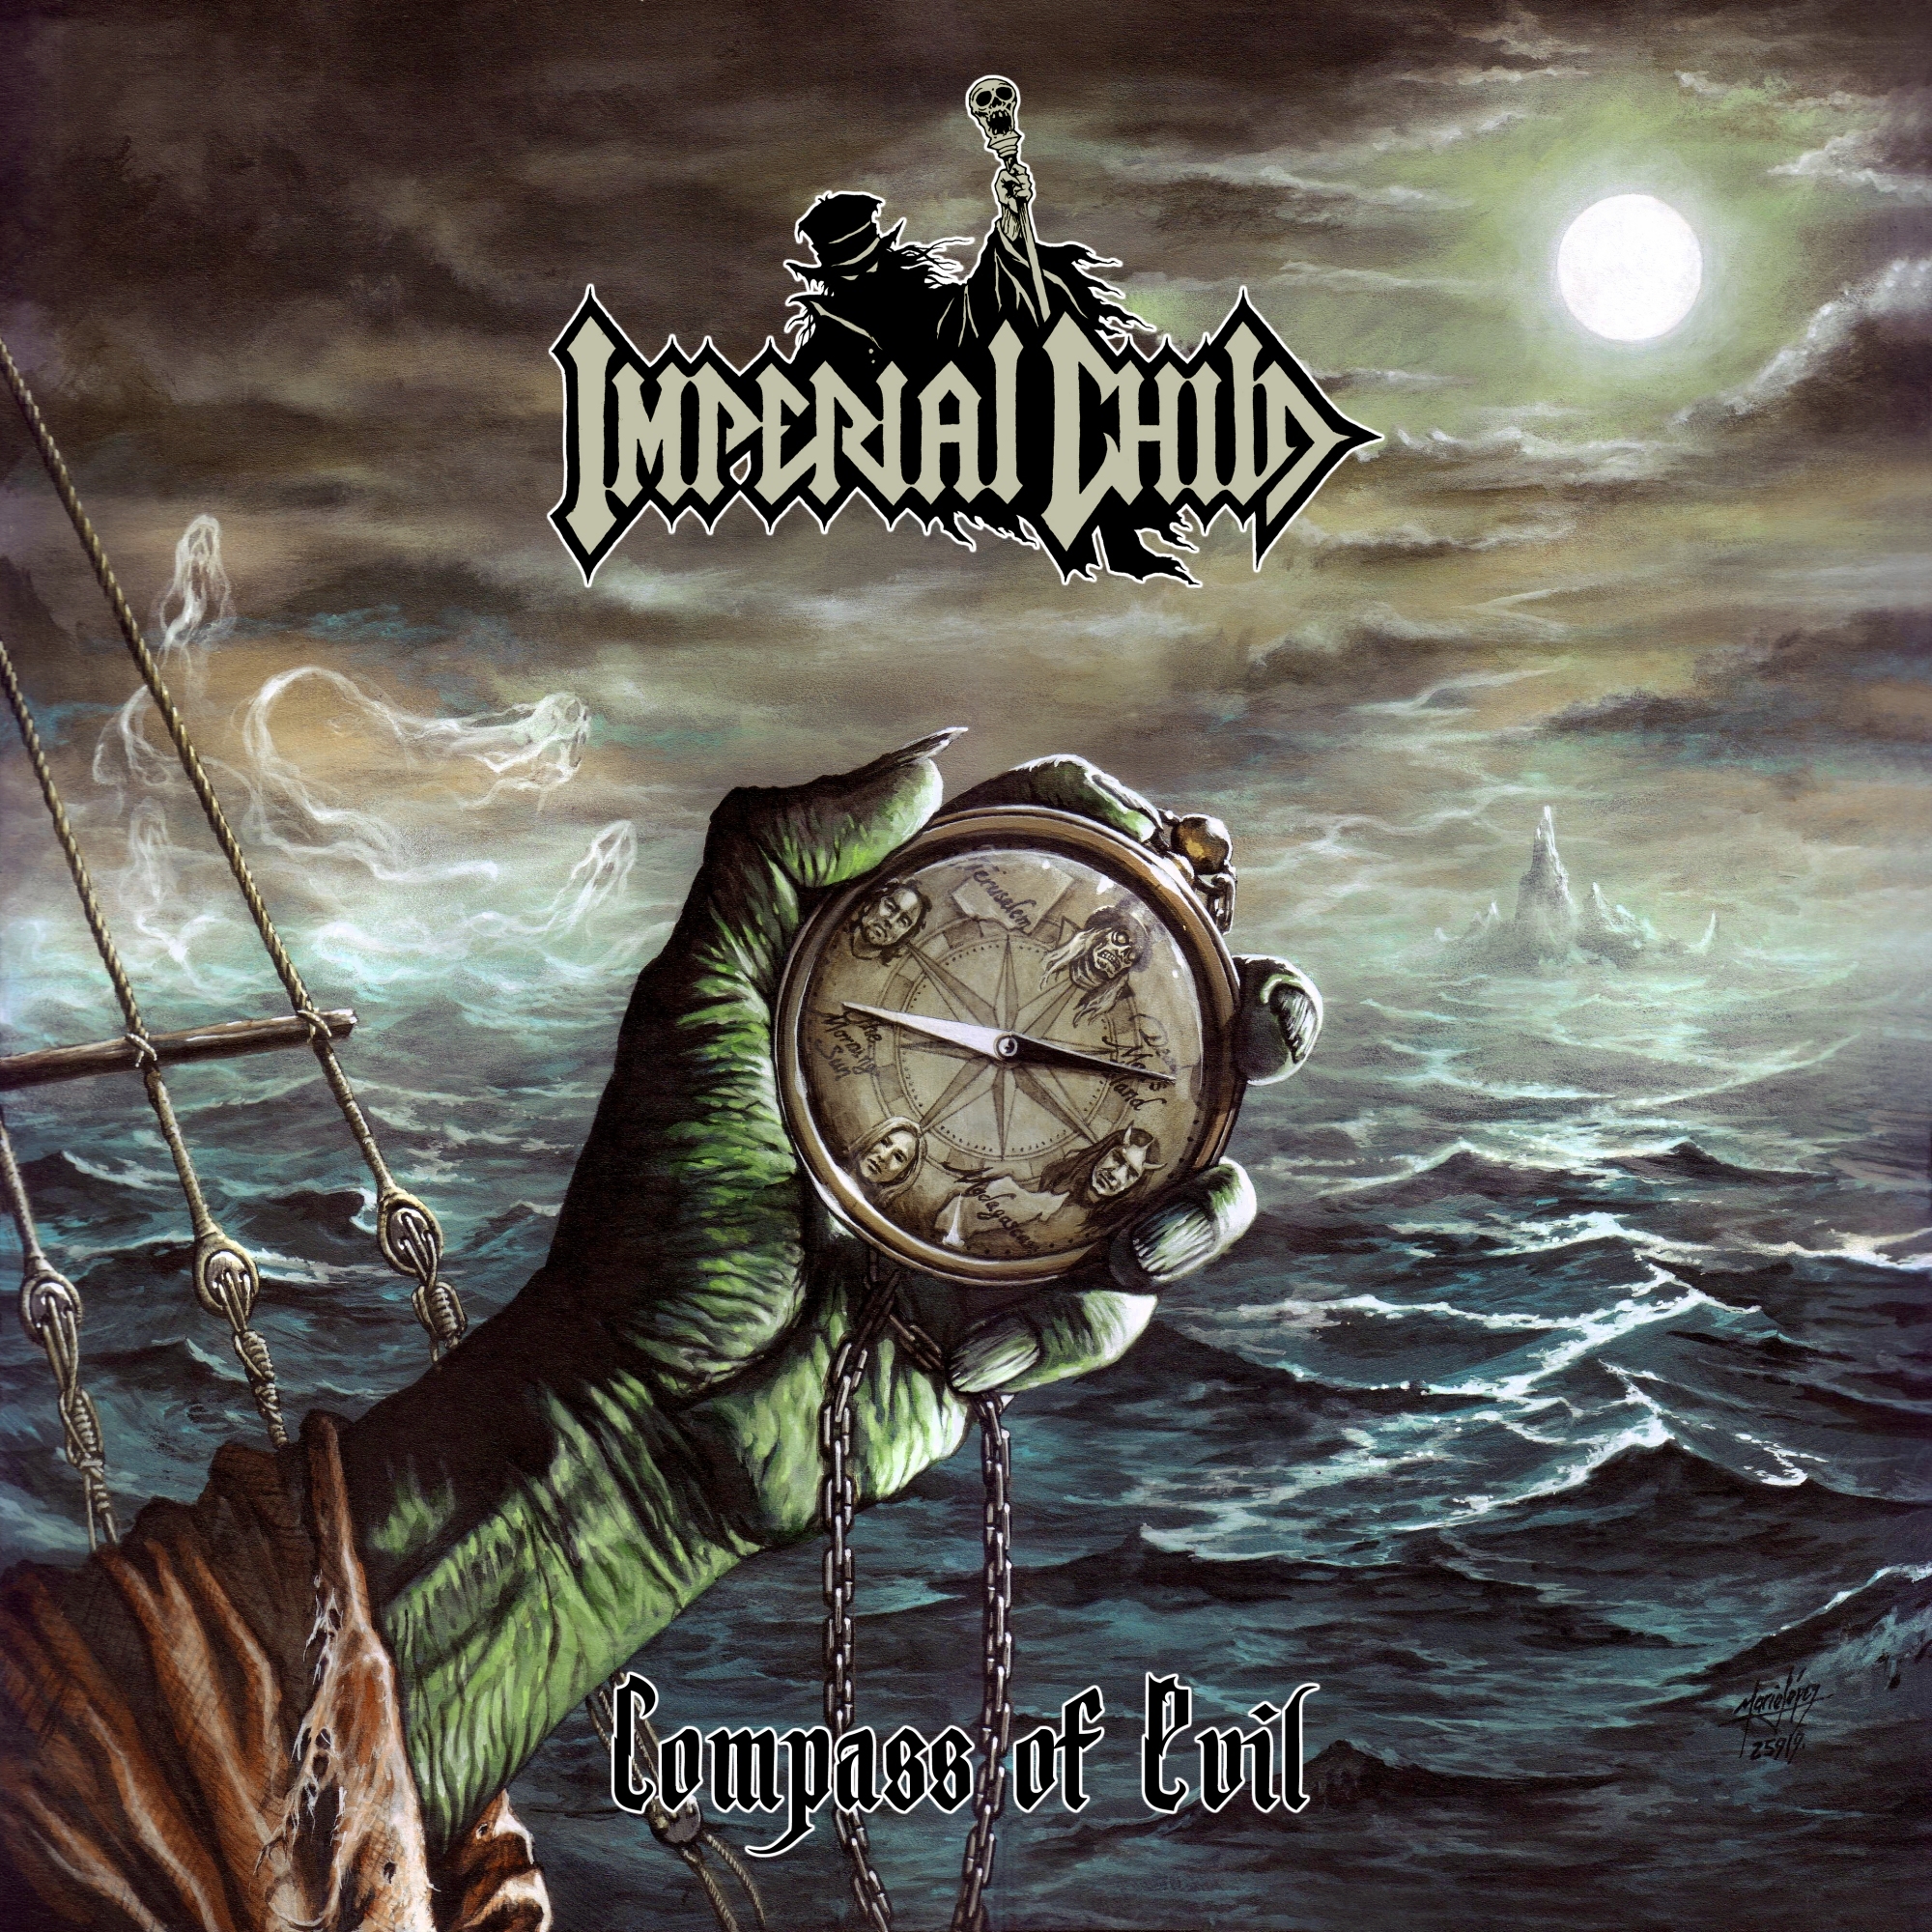 imperial child - cd